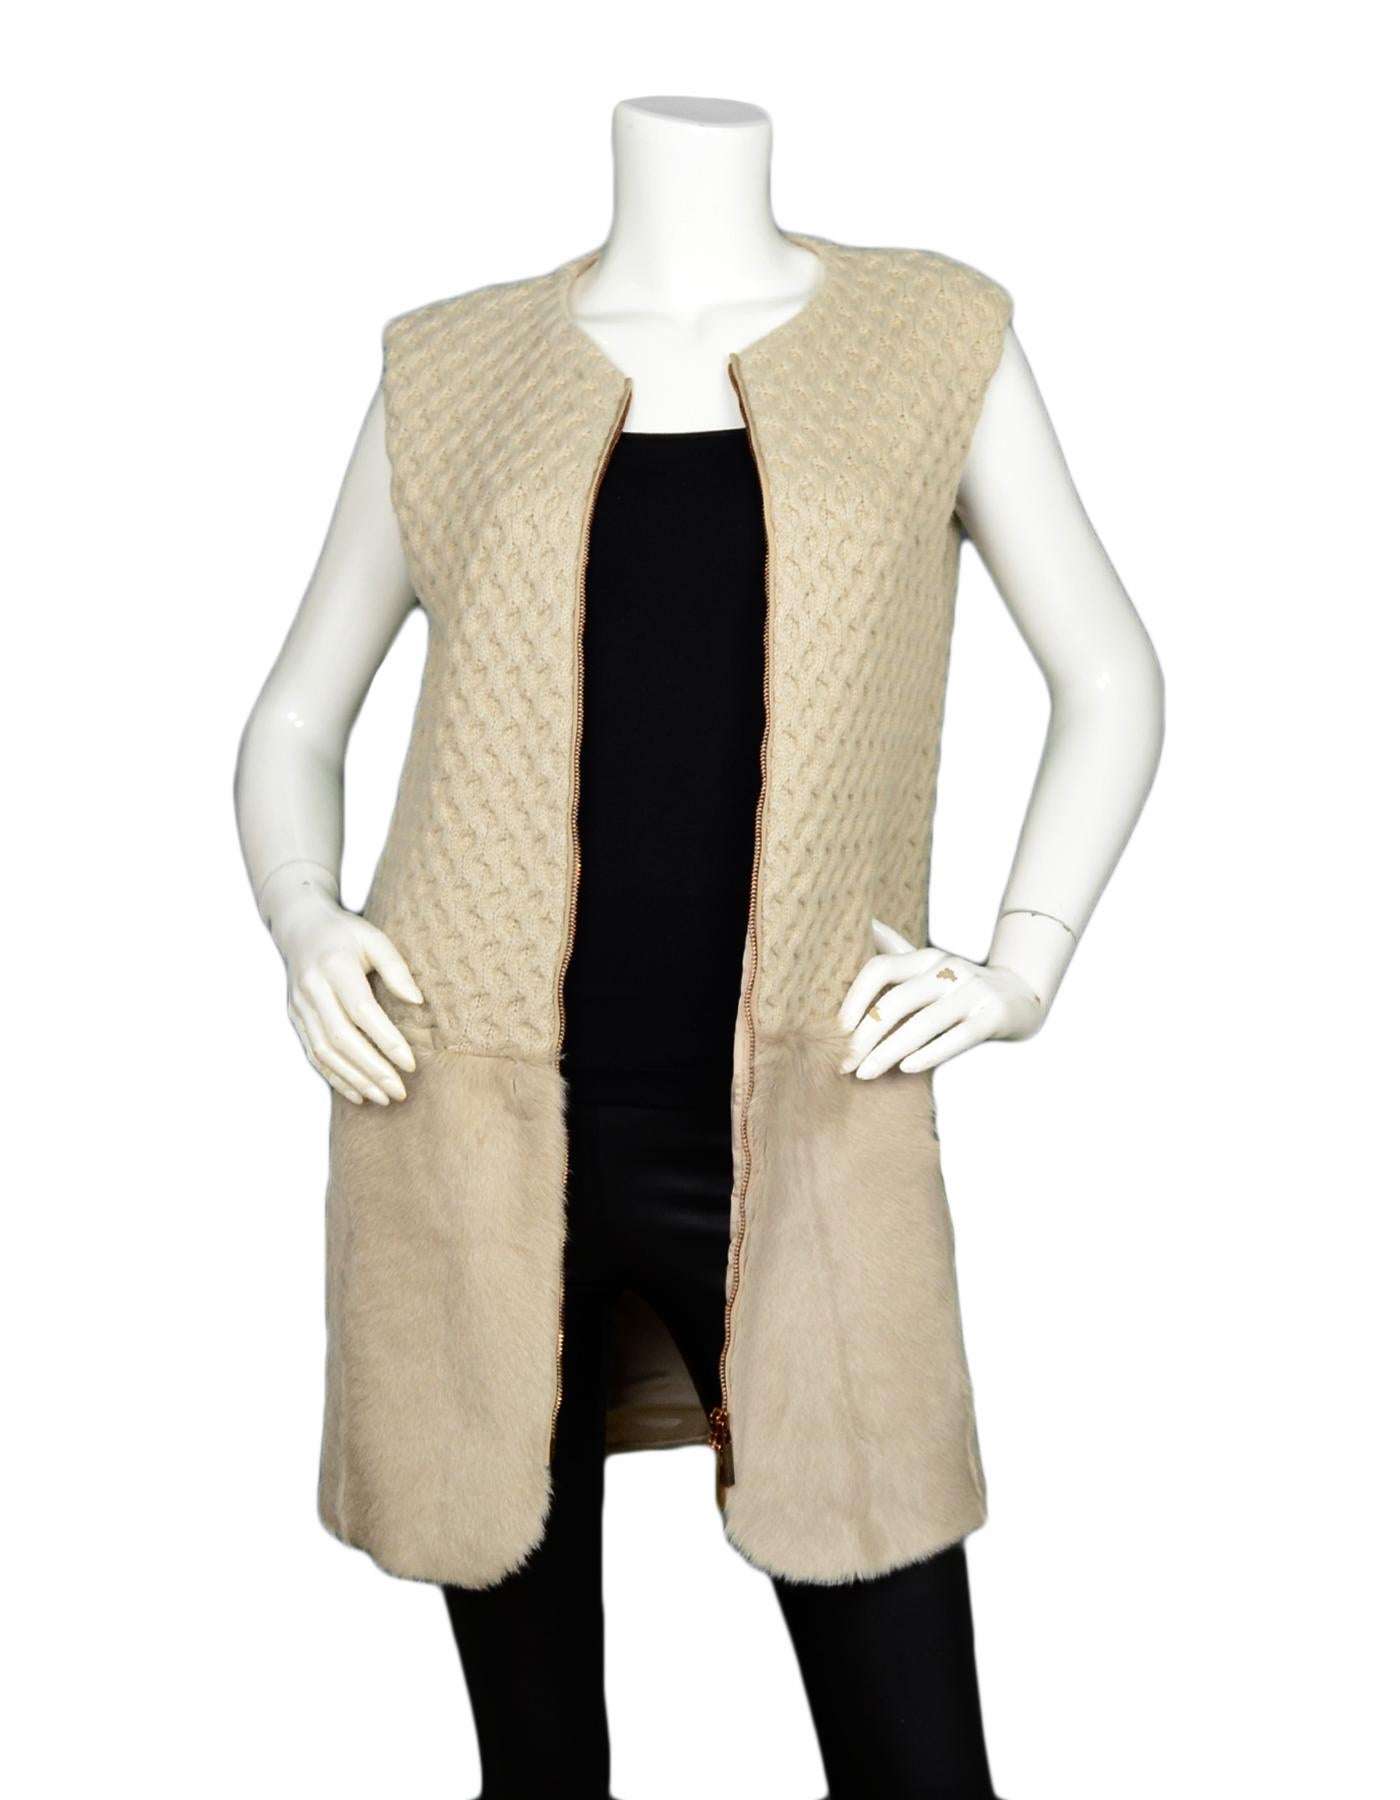 Piazza Sempione Beige Wool Fur Knit Zip Up Vest w/ Fur Trim sz IT 40

Made In: Italy
Year of Production: 
Color:
Materials: 75% Wool, 15% Silk, 10% Cashmere
Lining: 93% Cupro, 7% Elastane 
Opening/Closure: Front zip-up
Overall Condition: Excellent